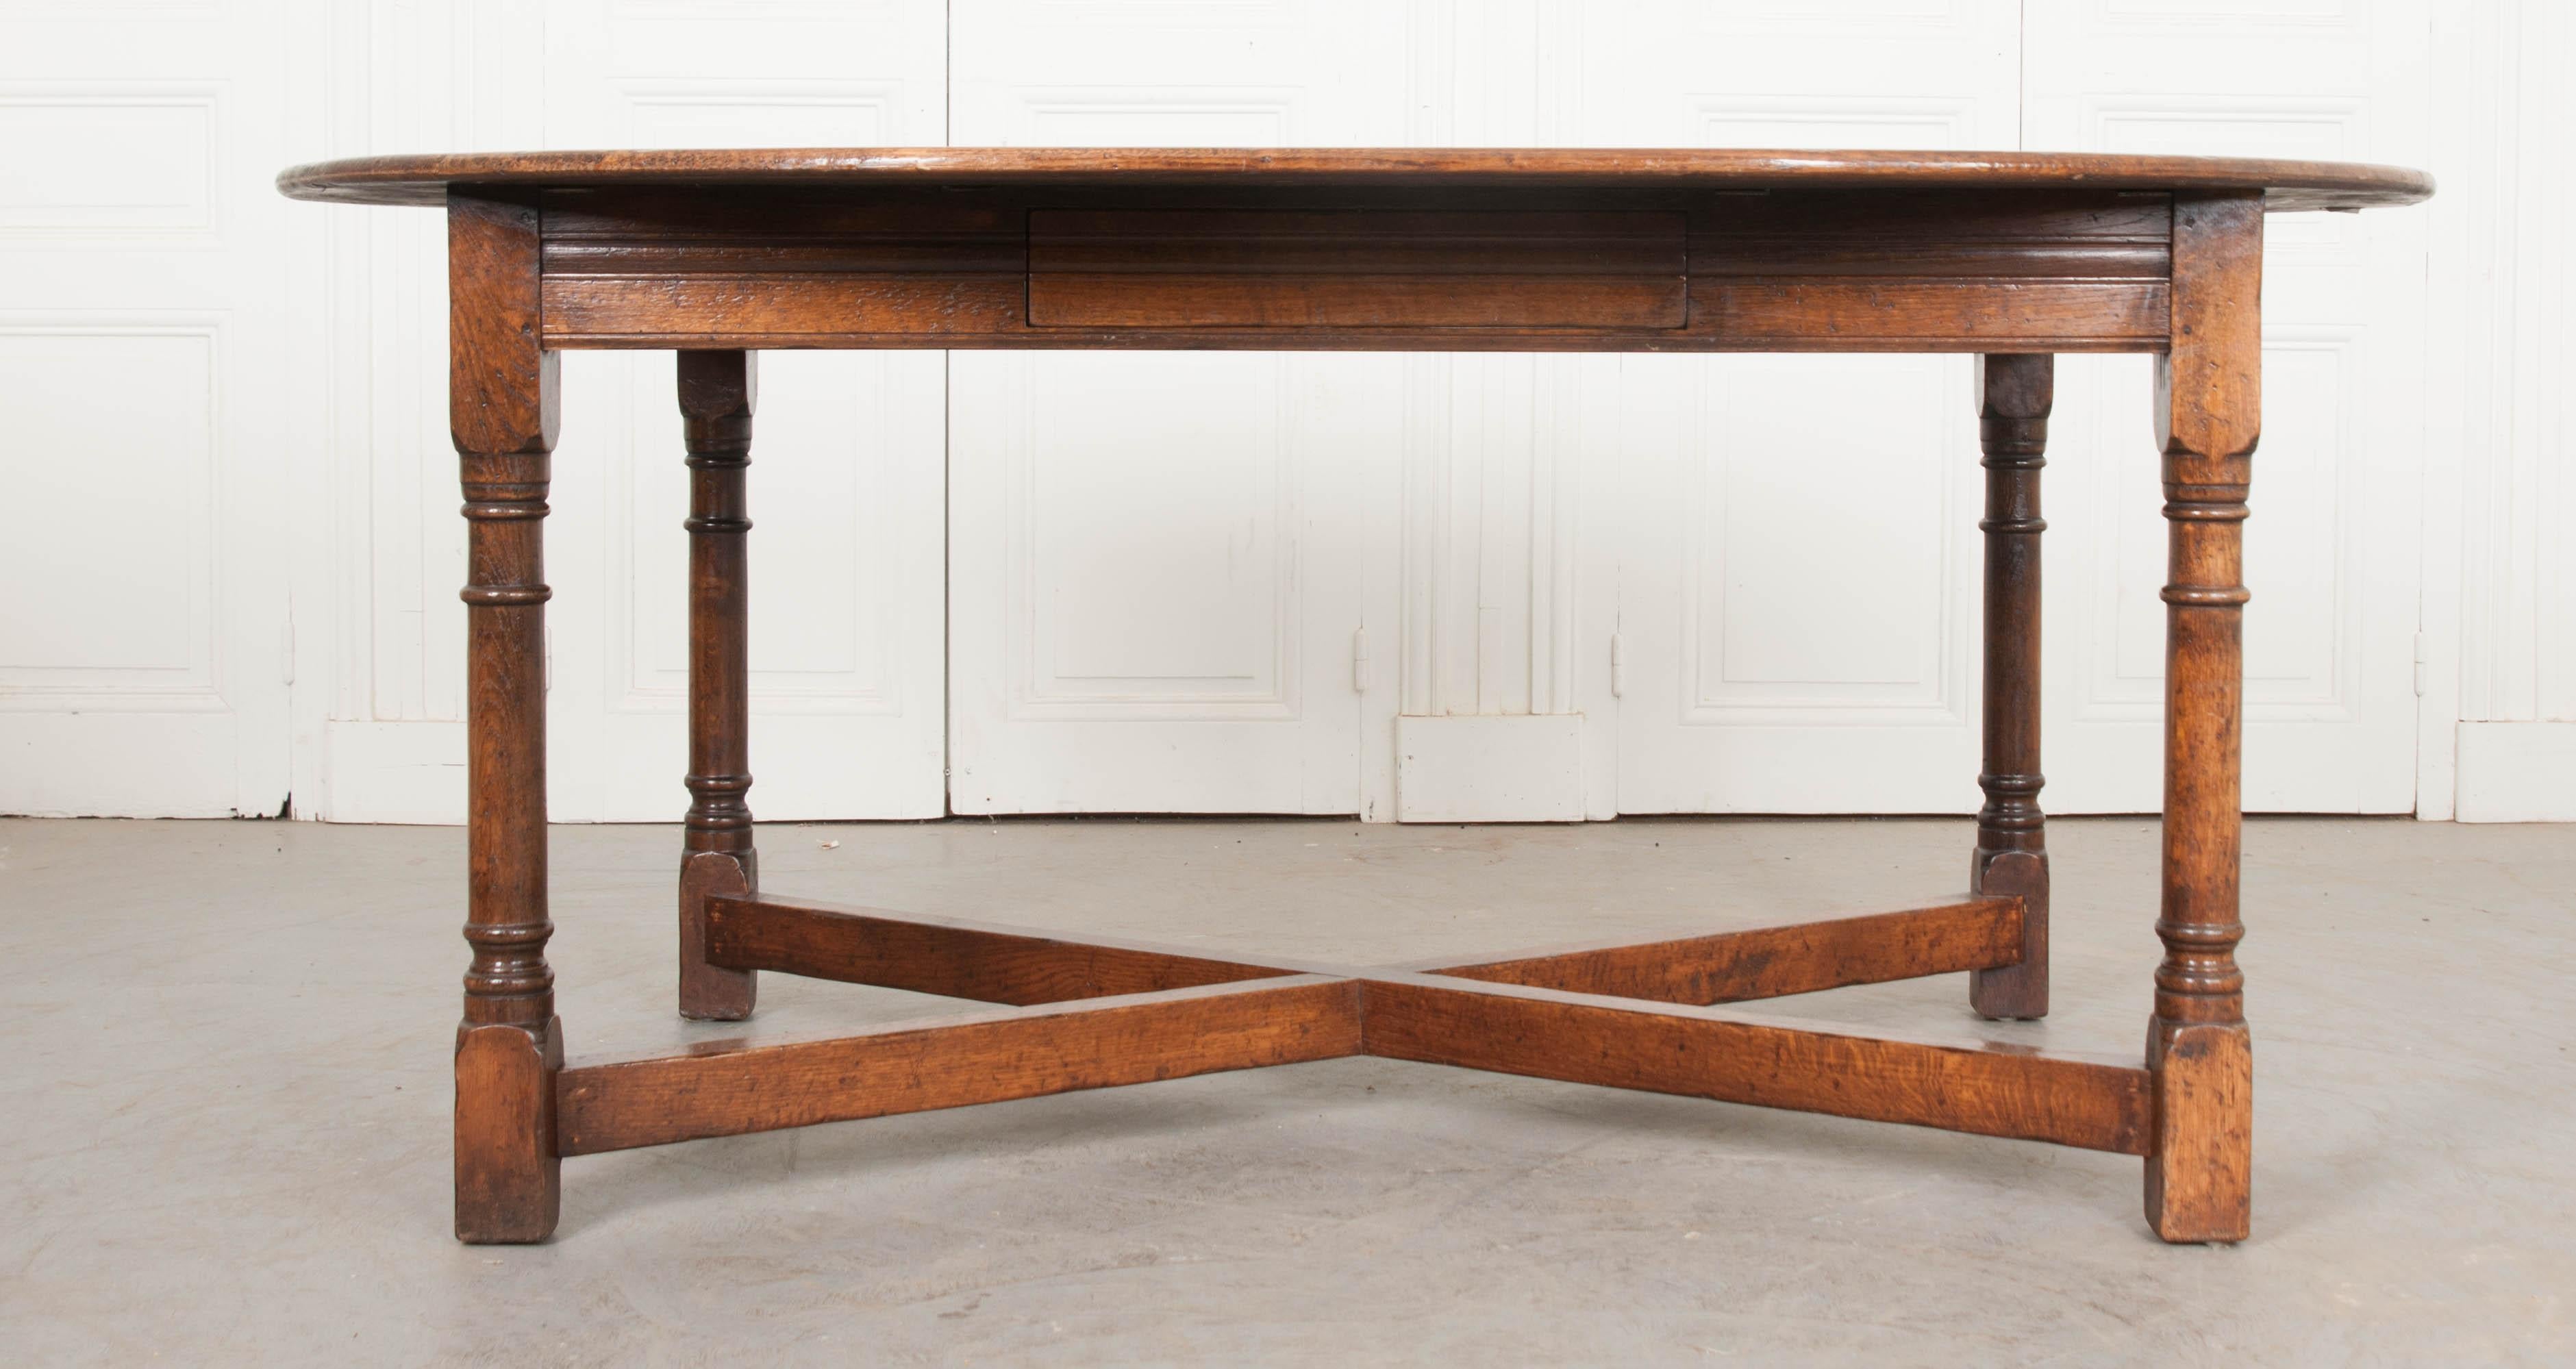 A uniquely styled oak dining table from The Netherlands, circa 1880. This exceptional table has an oval / capsule-shaped top that has a simple rounded edge. Its large size makes it ideal for having the family gather around for dinner, while its